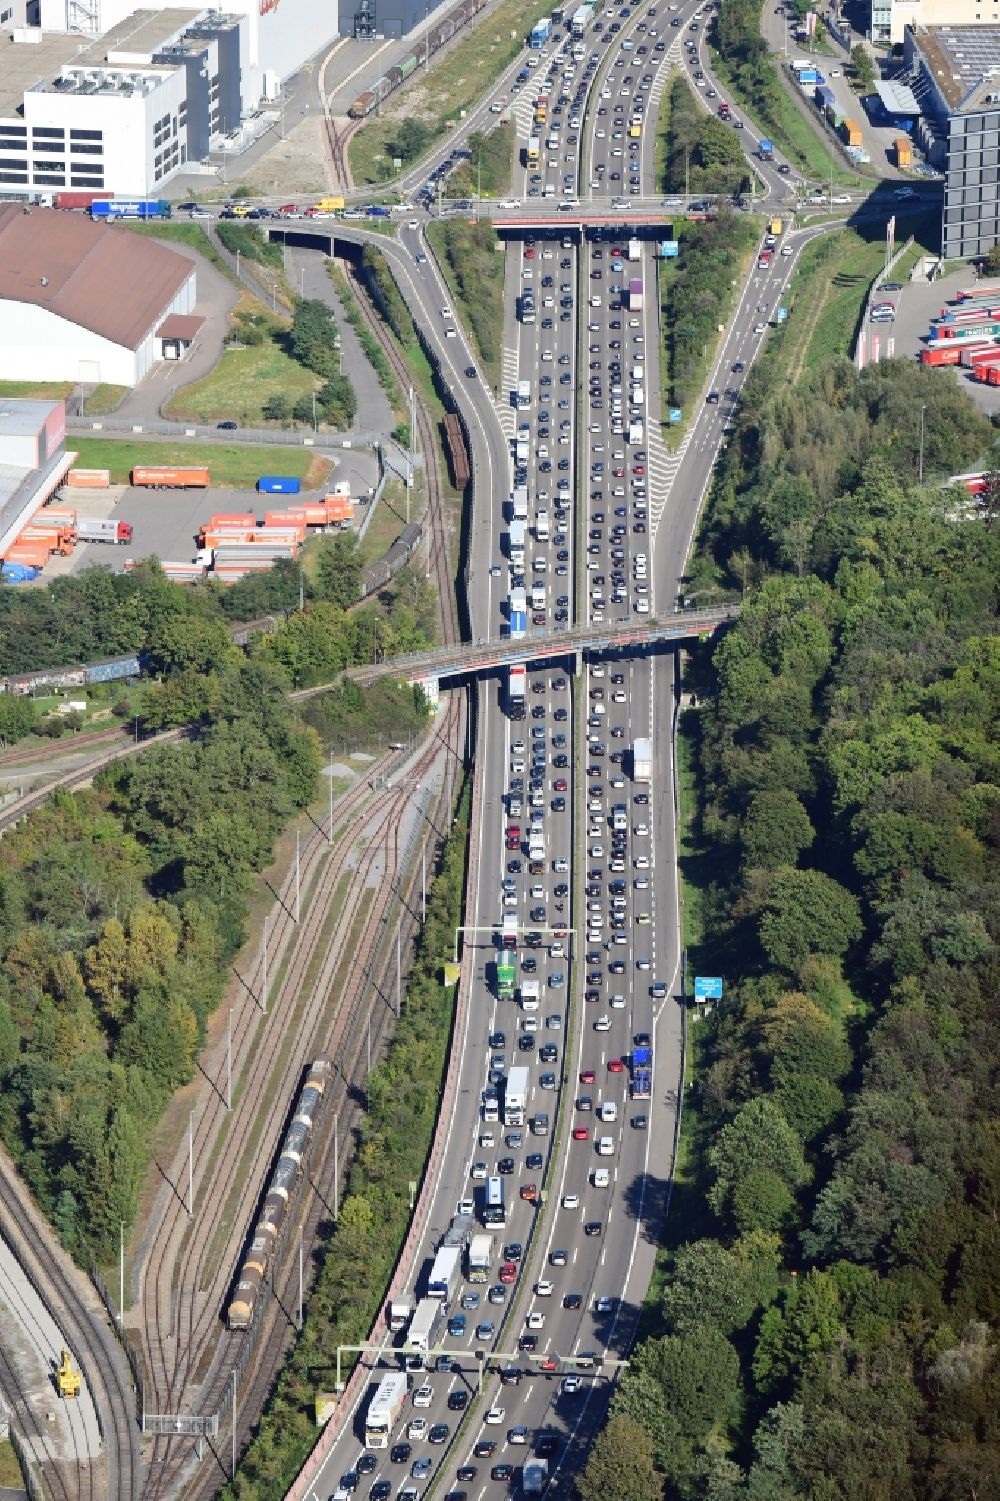 Aerial image Pratteln - Highway congestion along the route of the lanes of the swiss motorway A2 / A3 in Pratteln next to Basle in the canton Basel-Landschaft, Switzerland